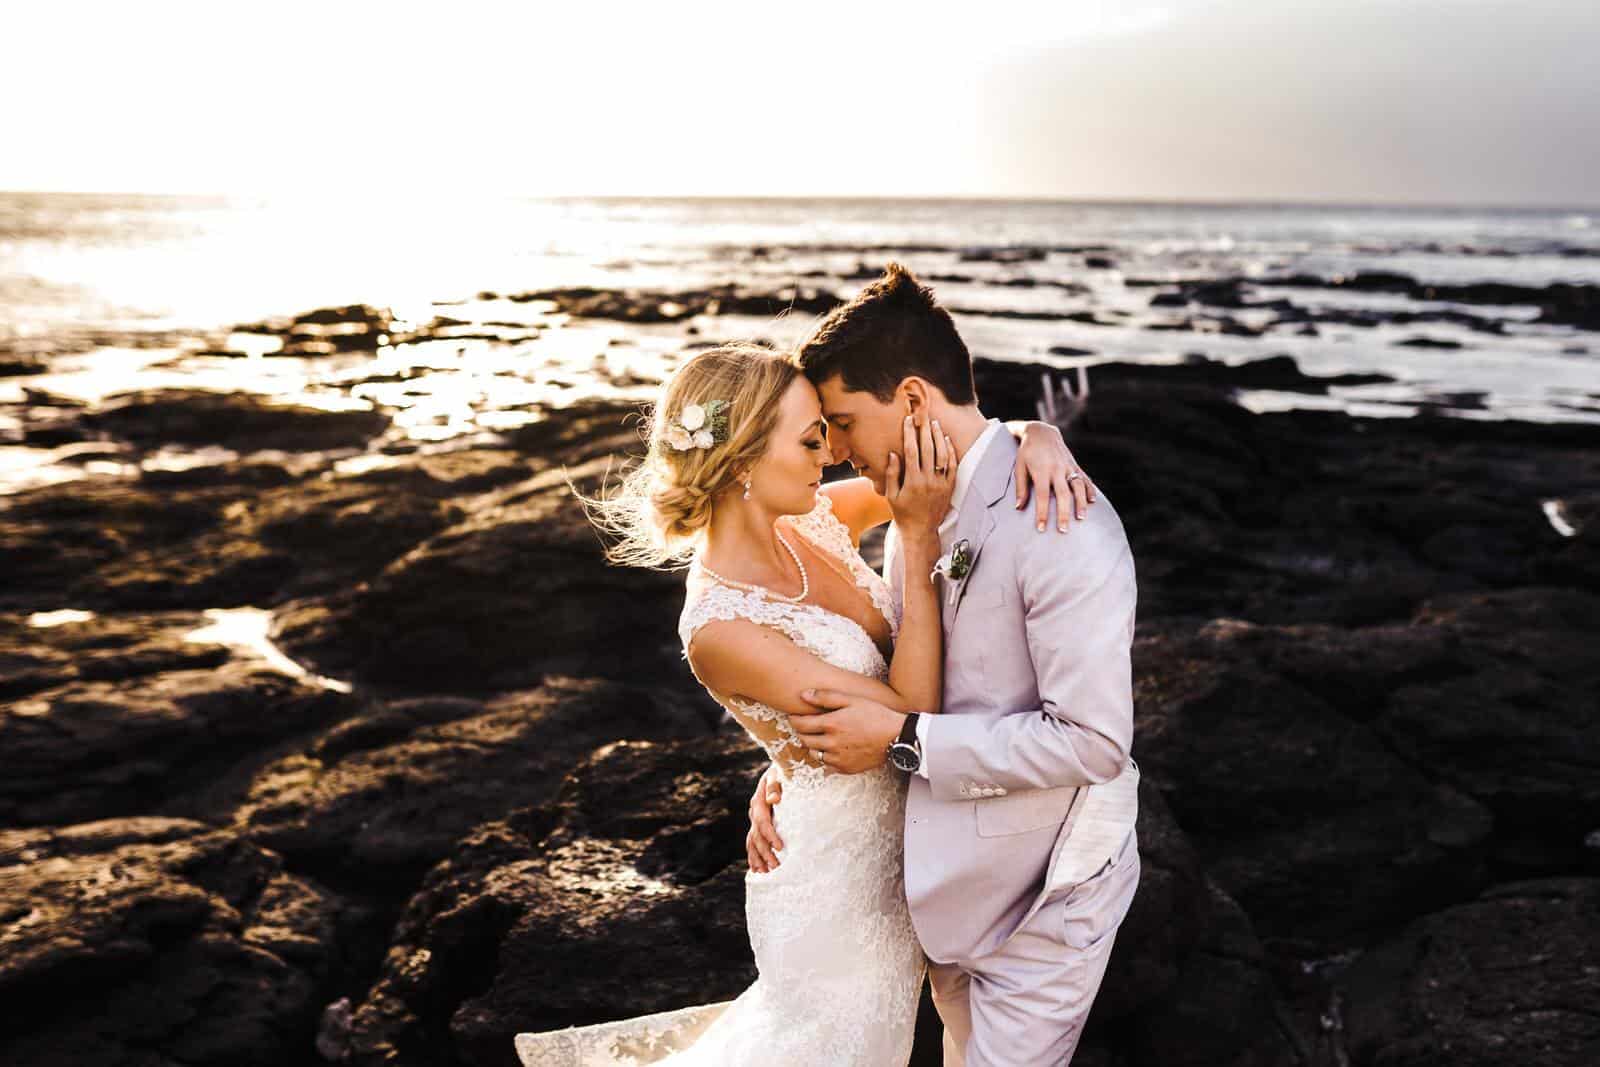 Standing on the rocks holding each other in Hawaii for their destination wedding